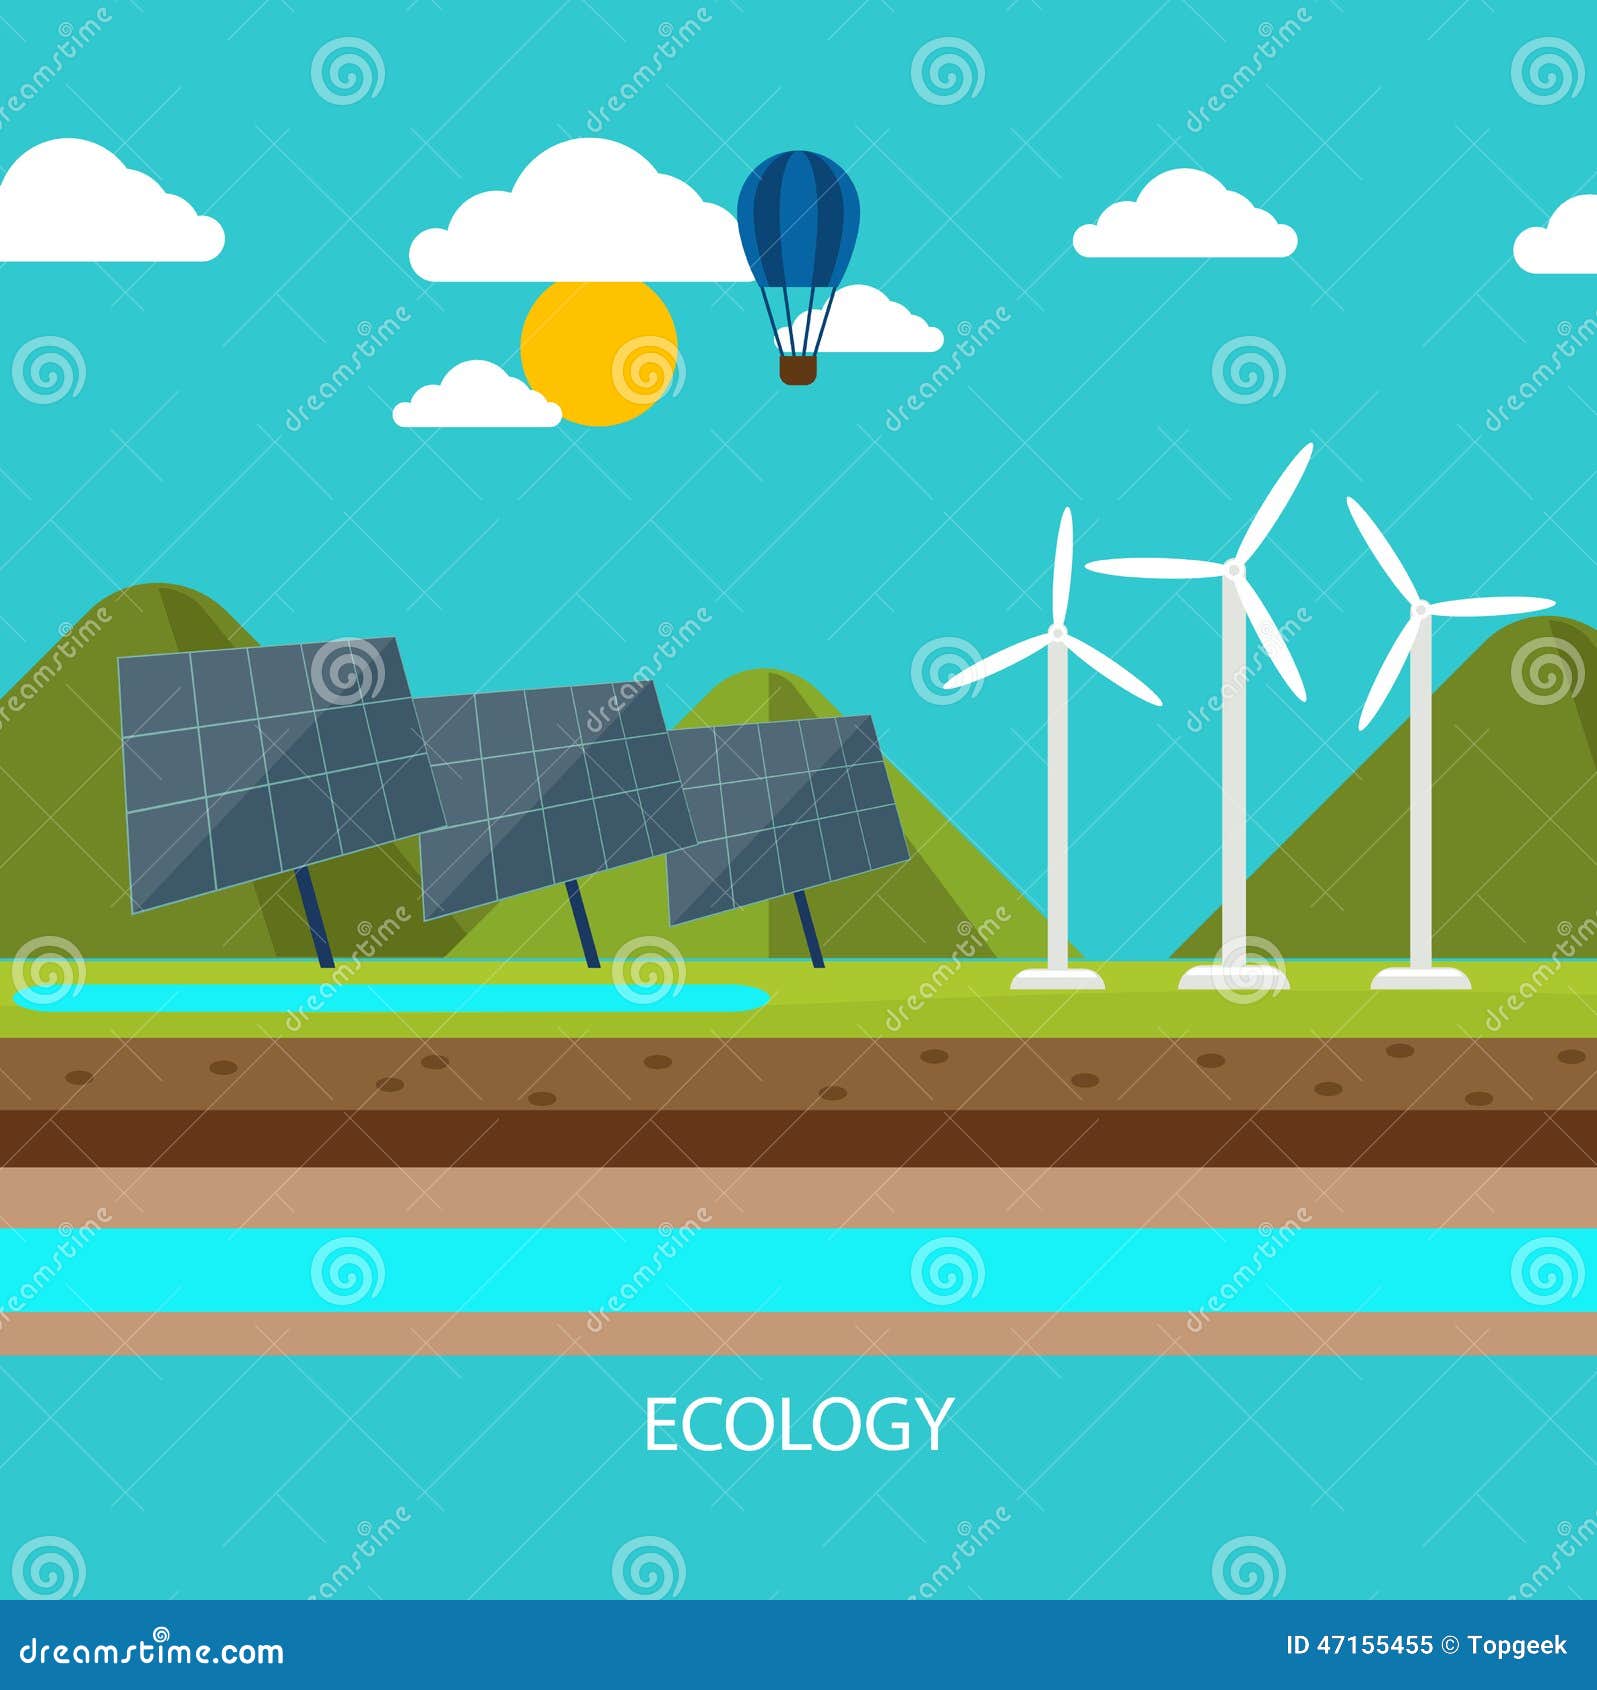 Renewable Energy Like Hydro, Solar And Wind Power Stock Vector - Image 